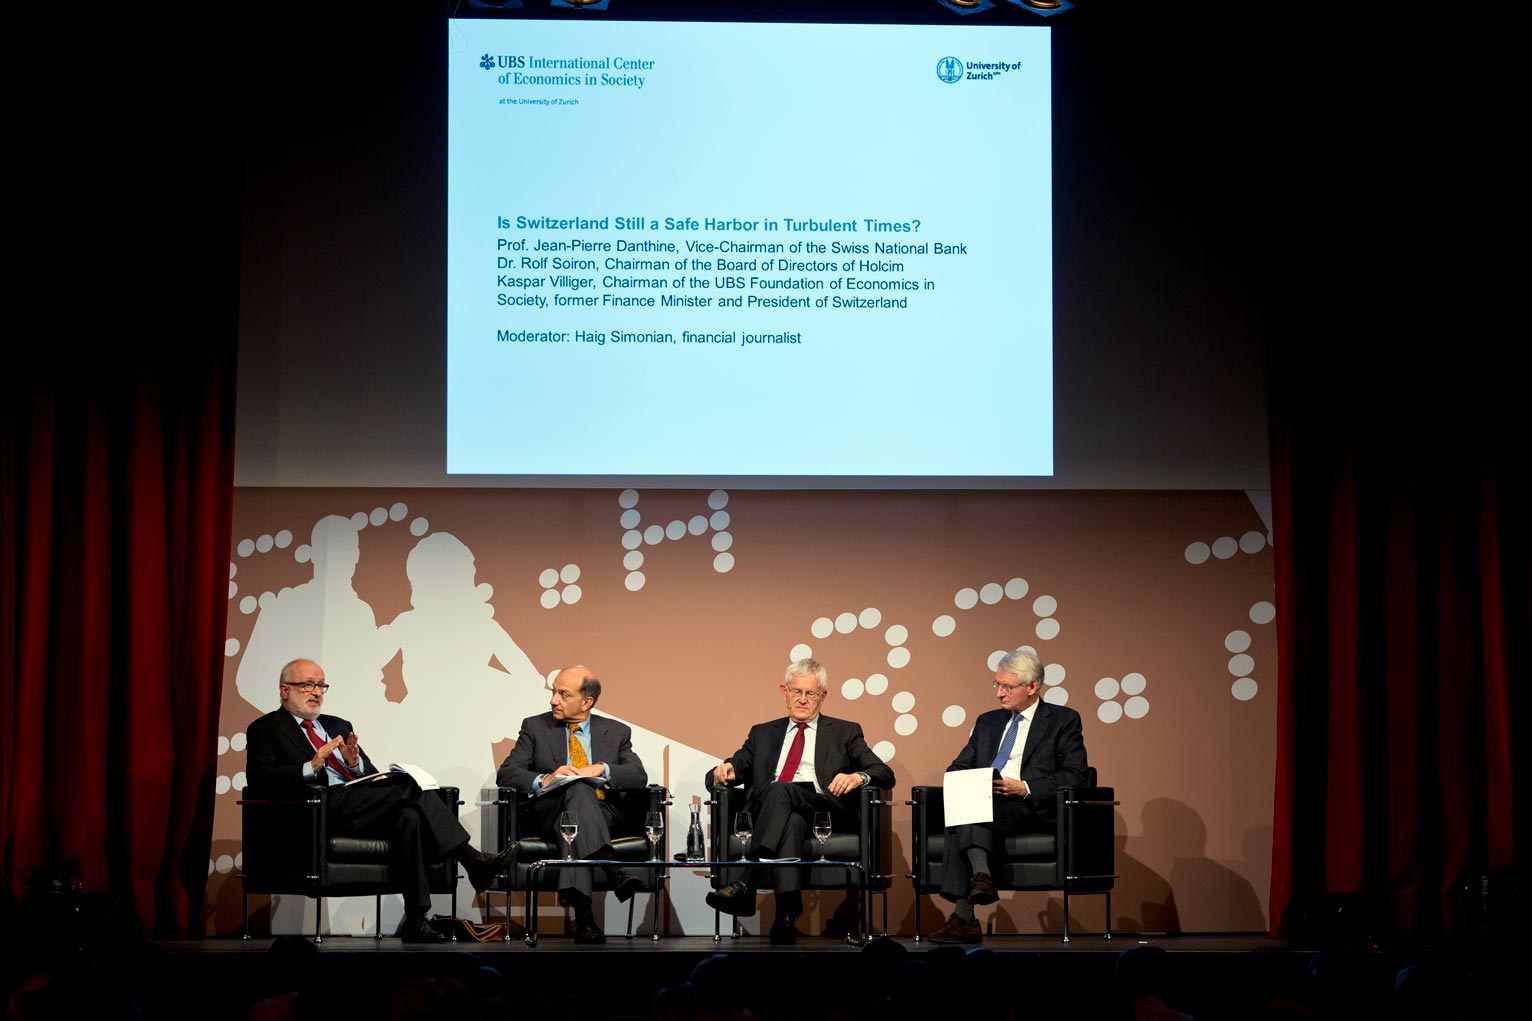 Panel discussion on 'Is Switzerland Still a Safe Harbor in Turbulent Times?'